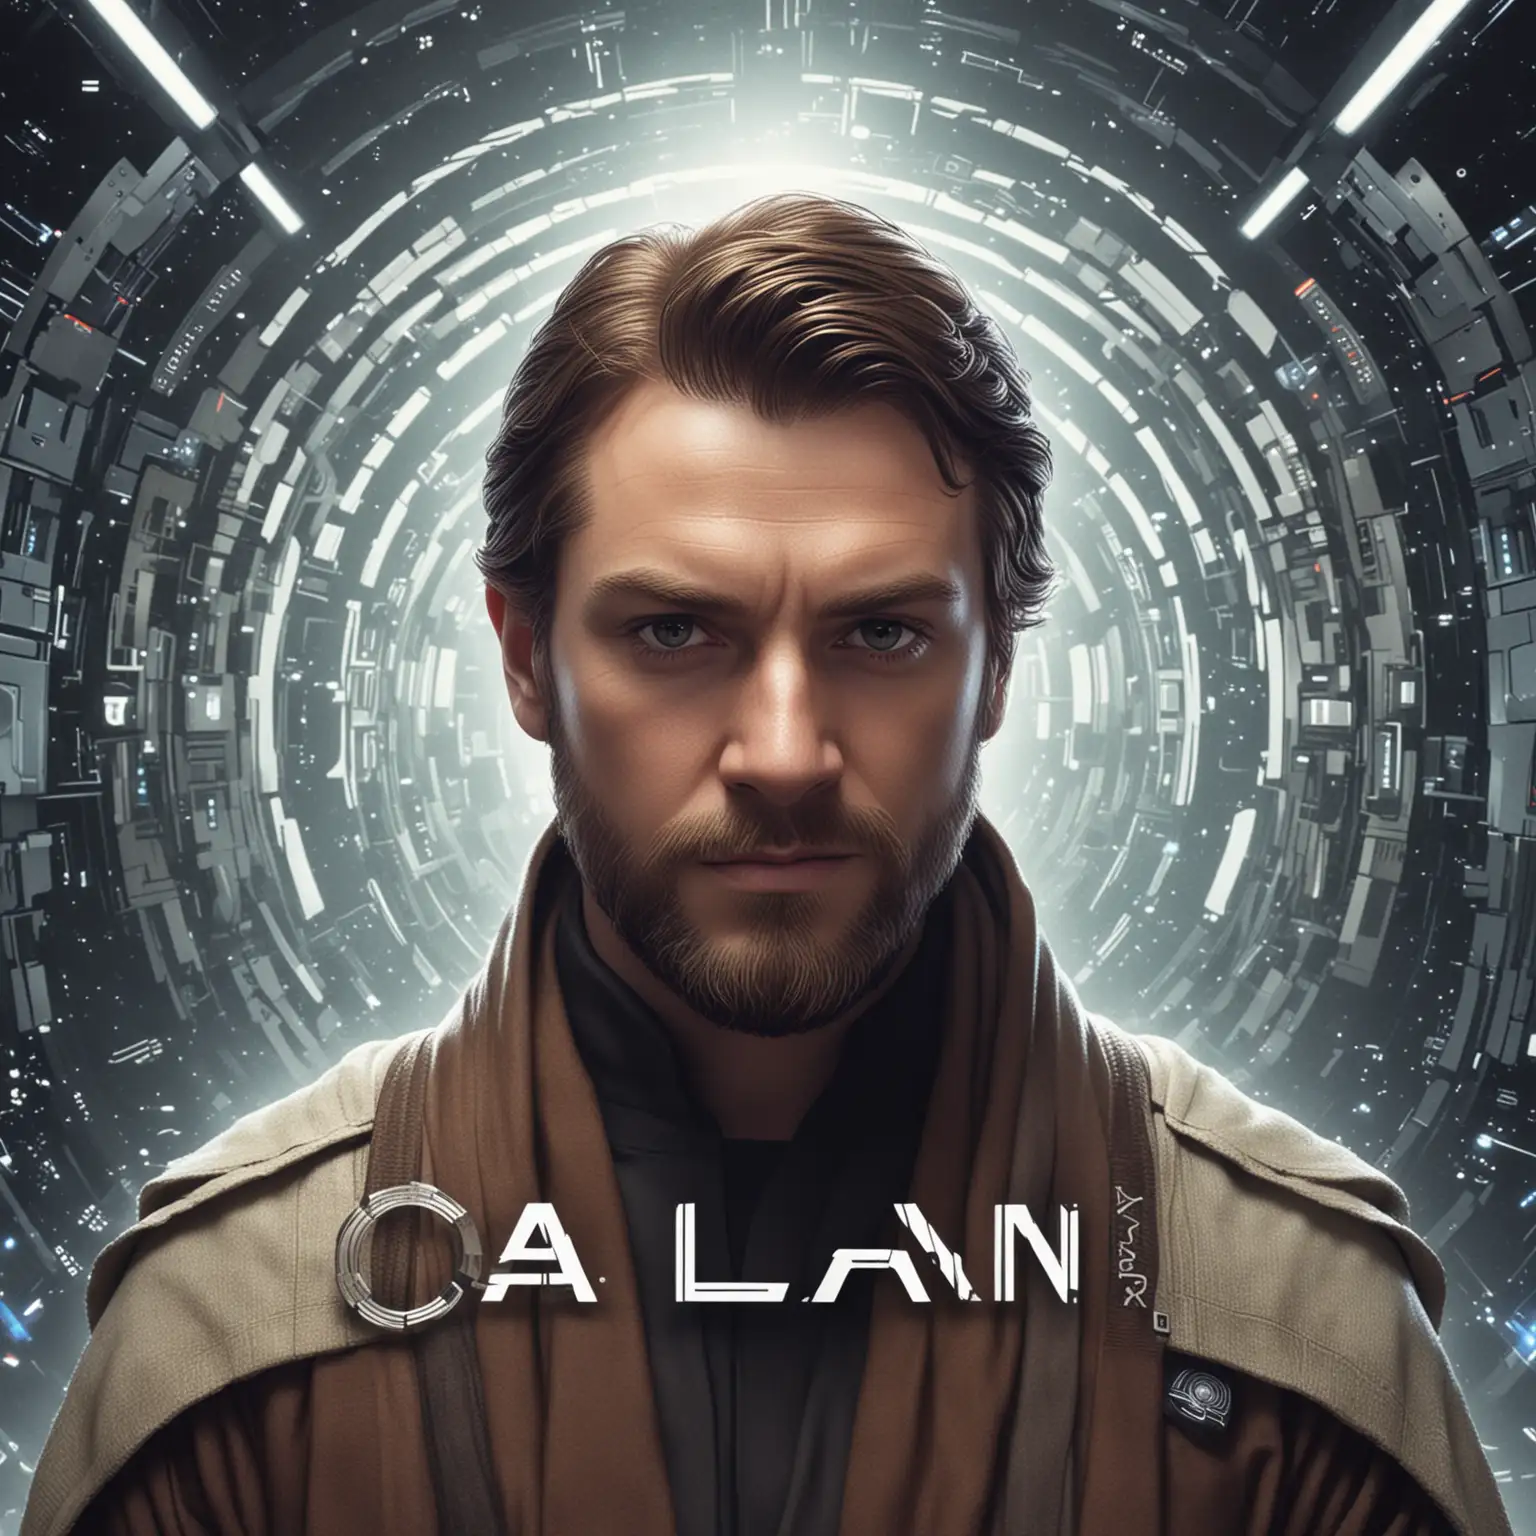 A logo for Callan Technologies depicting AI in a futuristic background, image based on obiwan and starwars